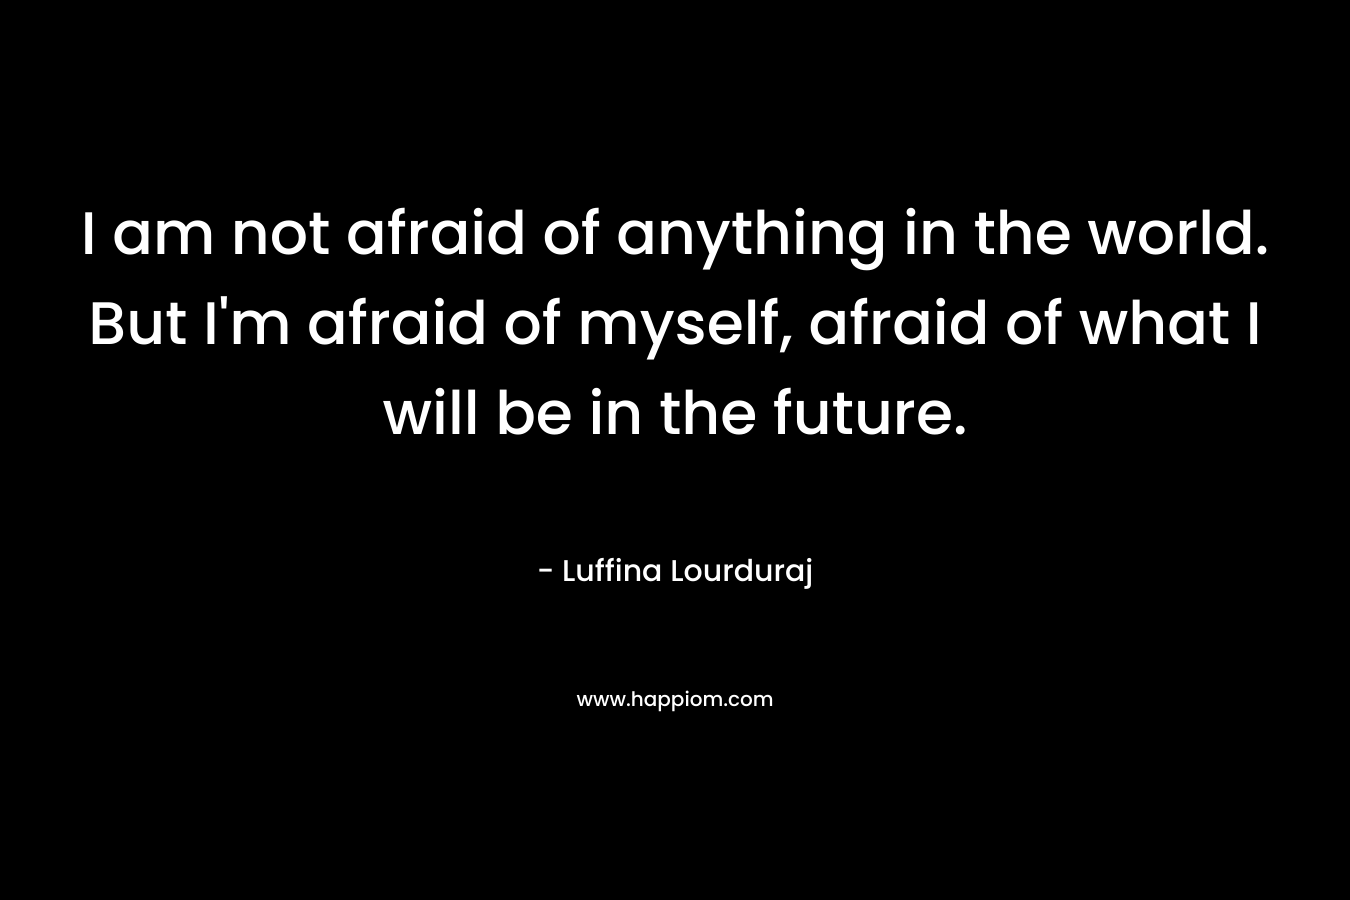 I am not afraid of anything in the world. But I'm afraid of myself, afraid of what I will be in the future.